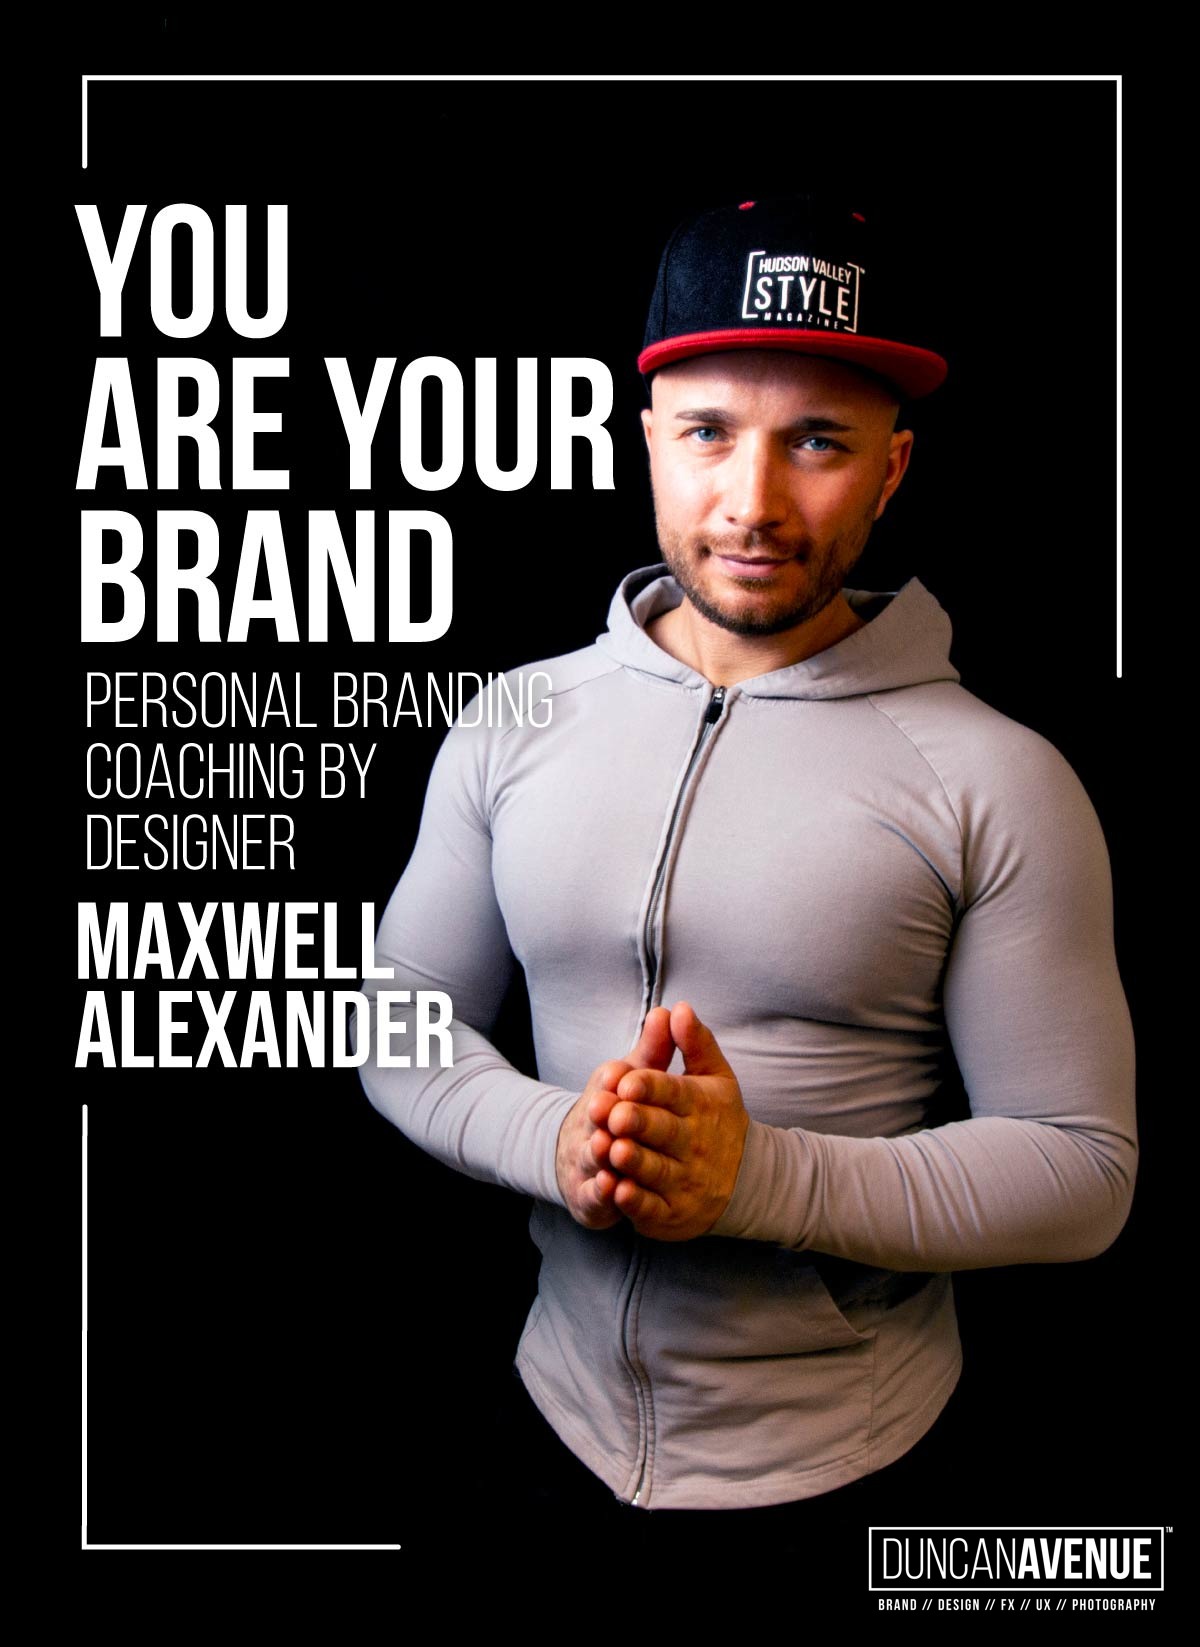 Is it time to revamp Your Personal Brand? Personal Branding Coaching by Designer Maxwell Alexander